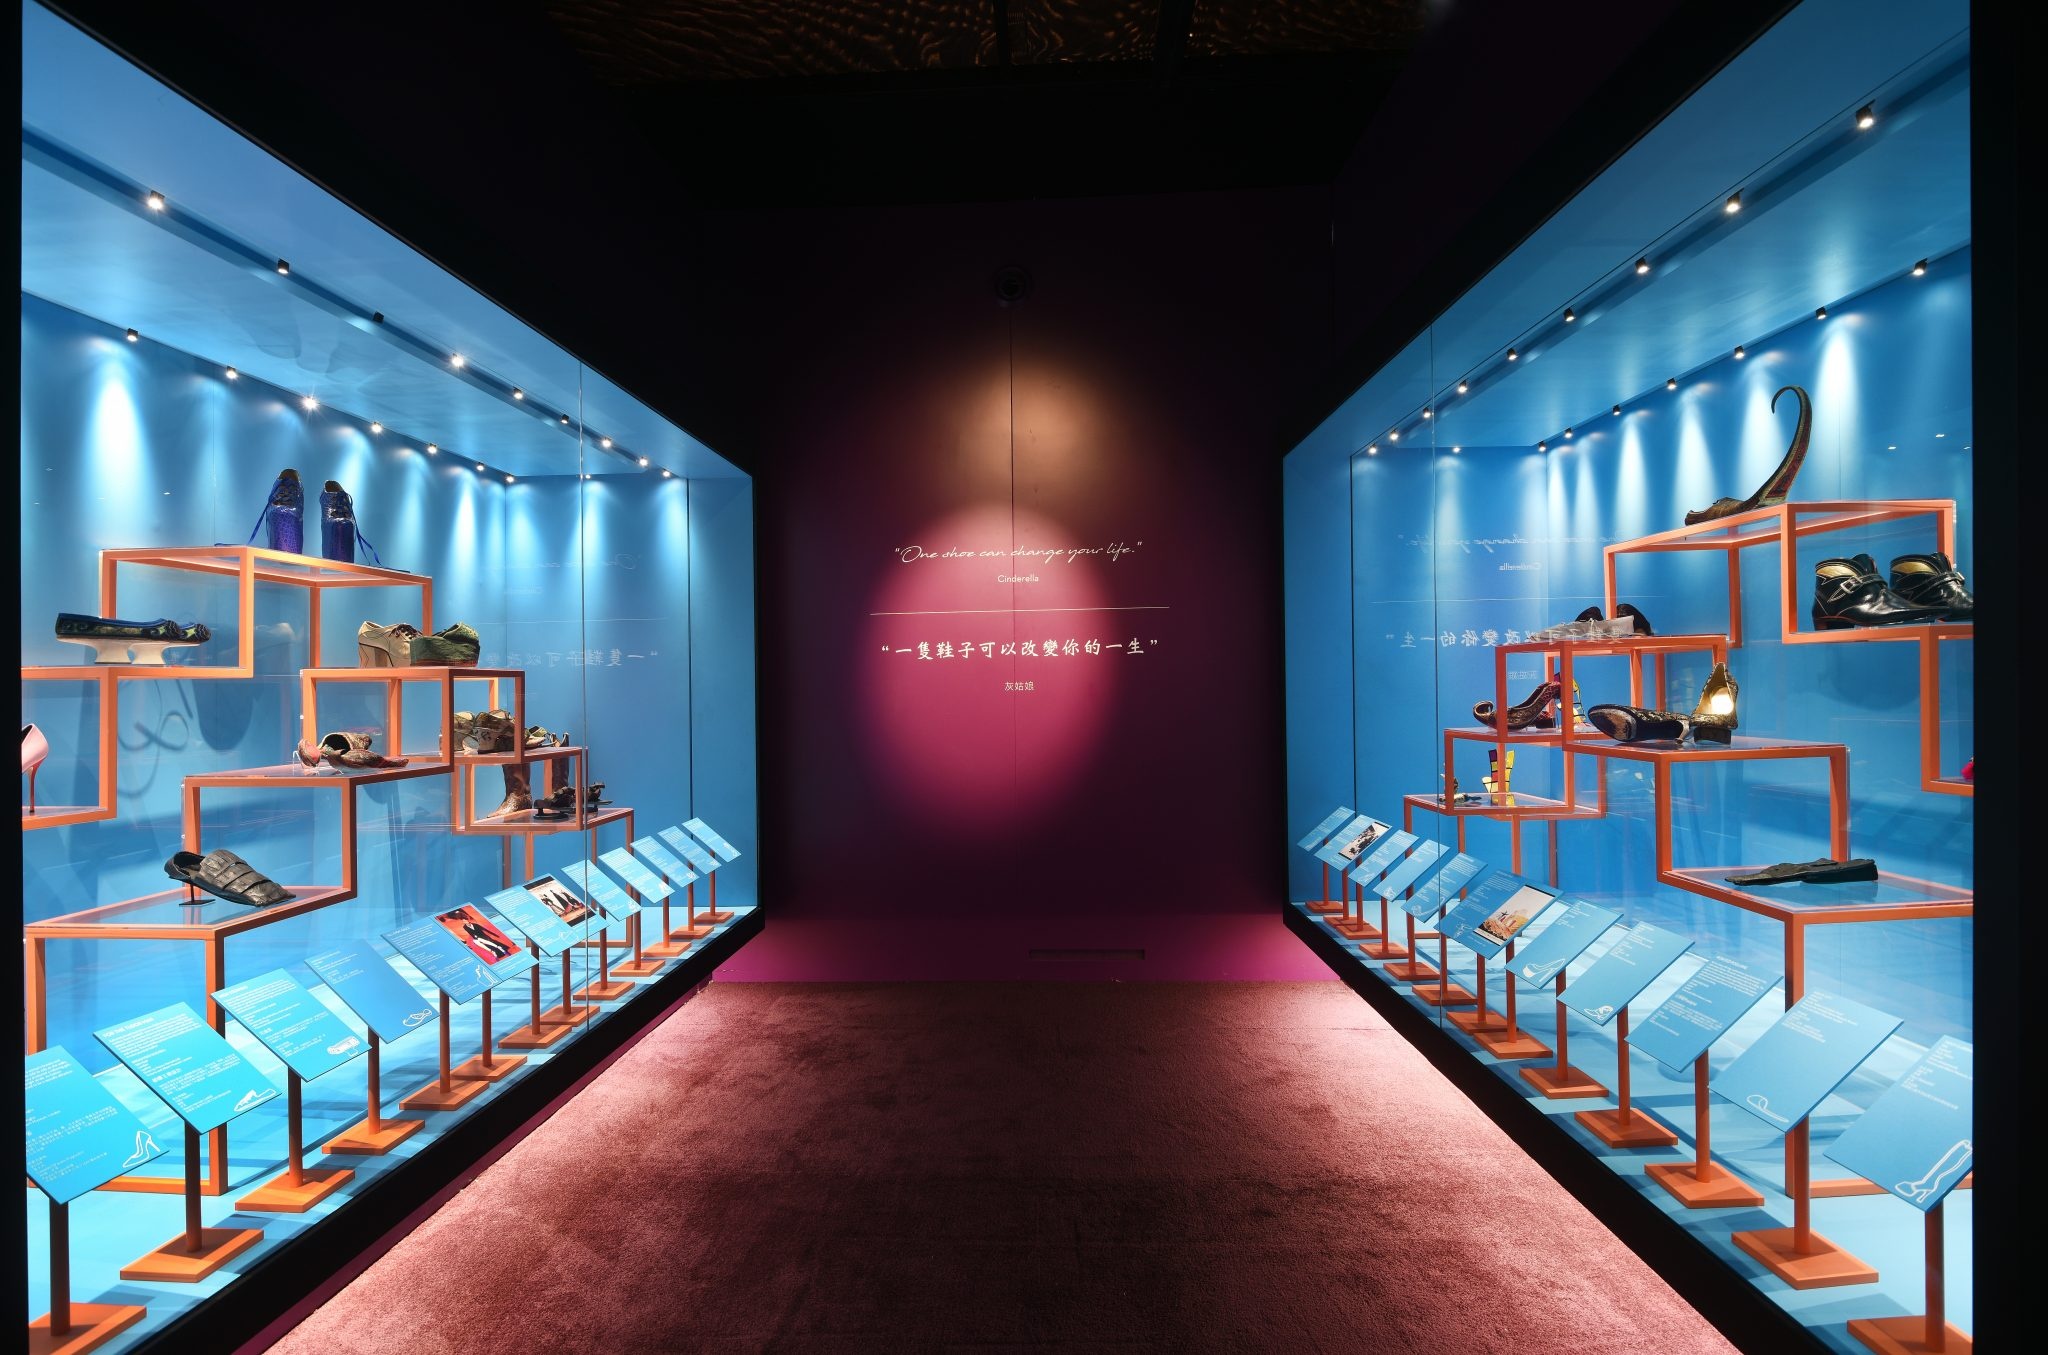 Shoes: Pleasure and Pain, from London’s Victoria & Albert Museum, makes its final stop in Asia in Hong Kong, which hopes to attract Chinese tourists. Courtesy image